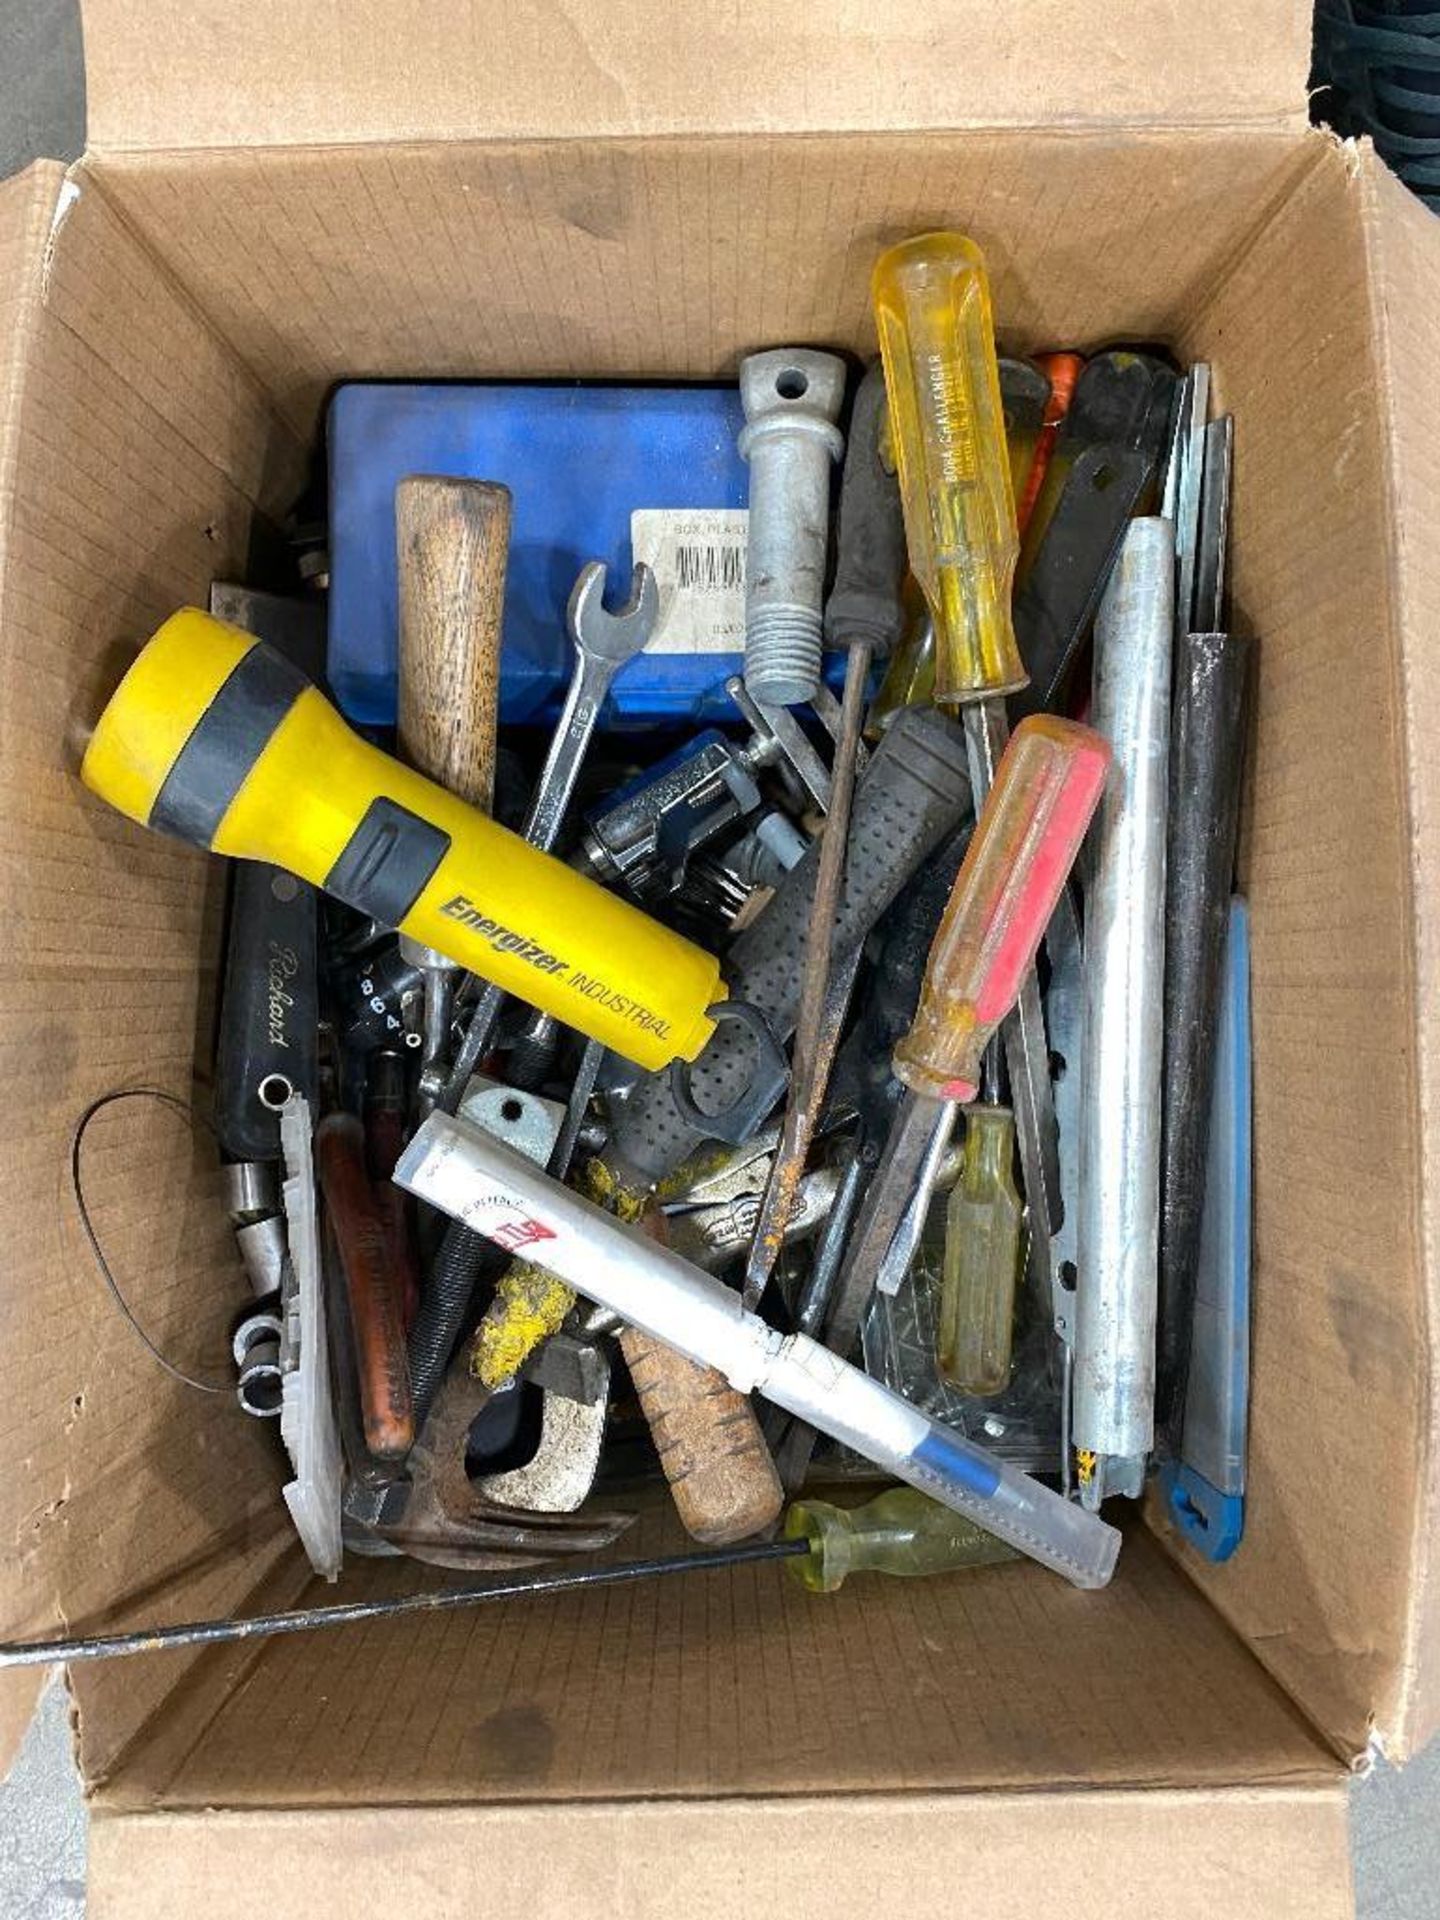 Box of Asst. Hand Tools including Screw Drivers, Scrapers, Hammer, Screws, etc. - Image 2 of 2